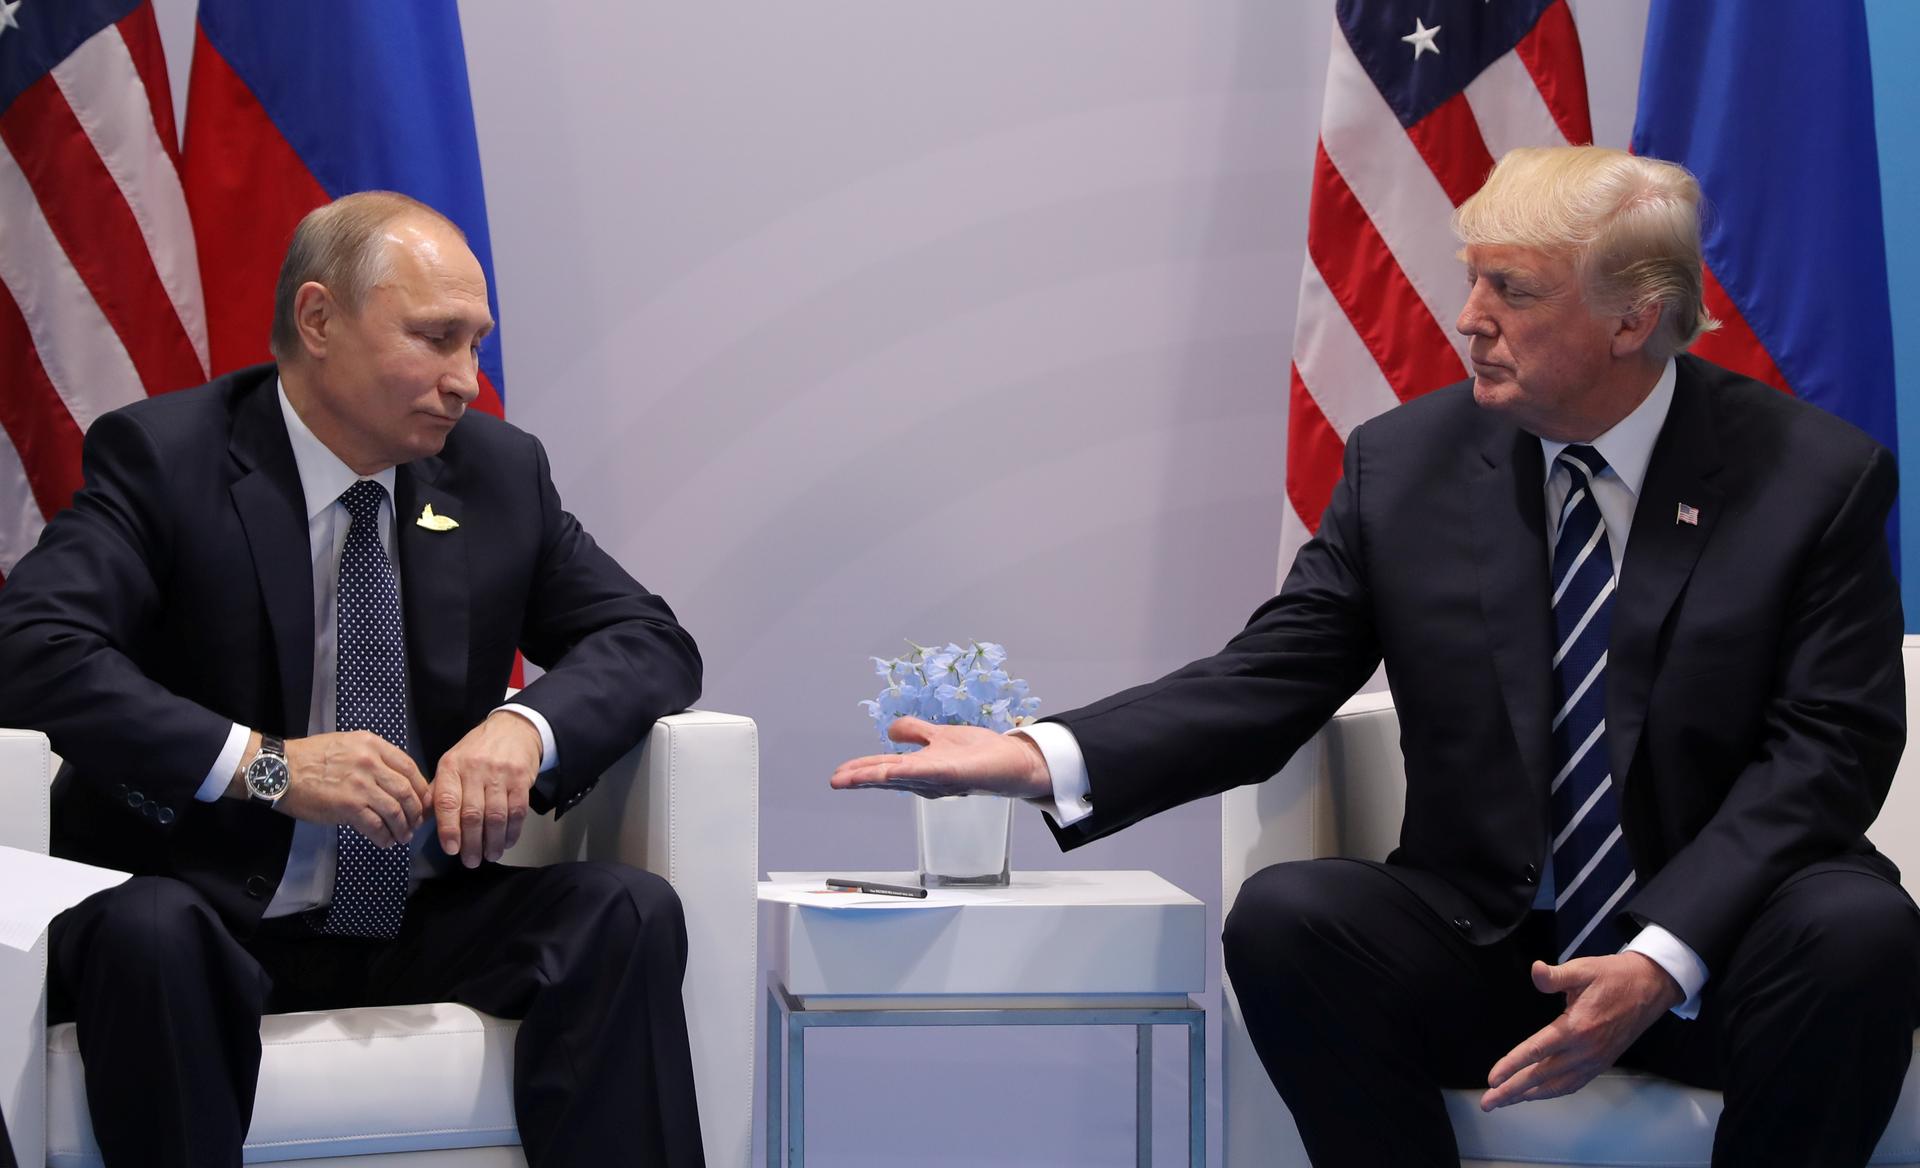 President Donald Trump meets with Russian President Vladimir Putin during the their bilateral meeting at the G20 summit in Hamburg.